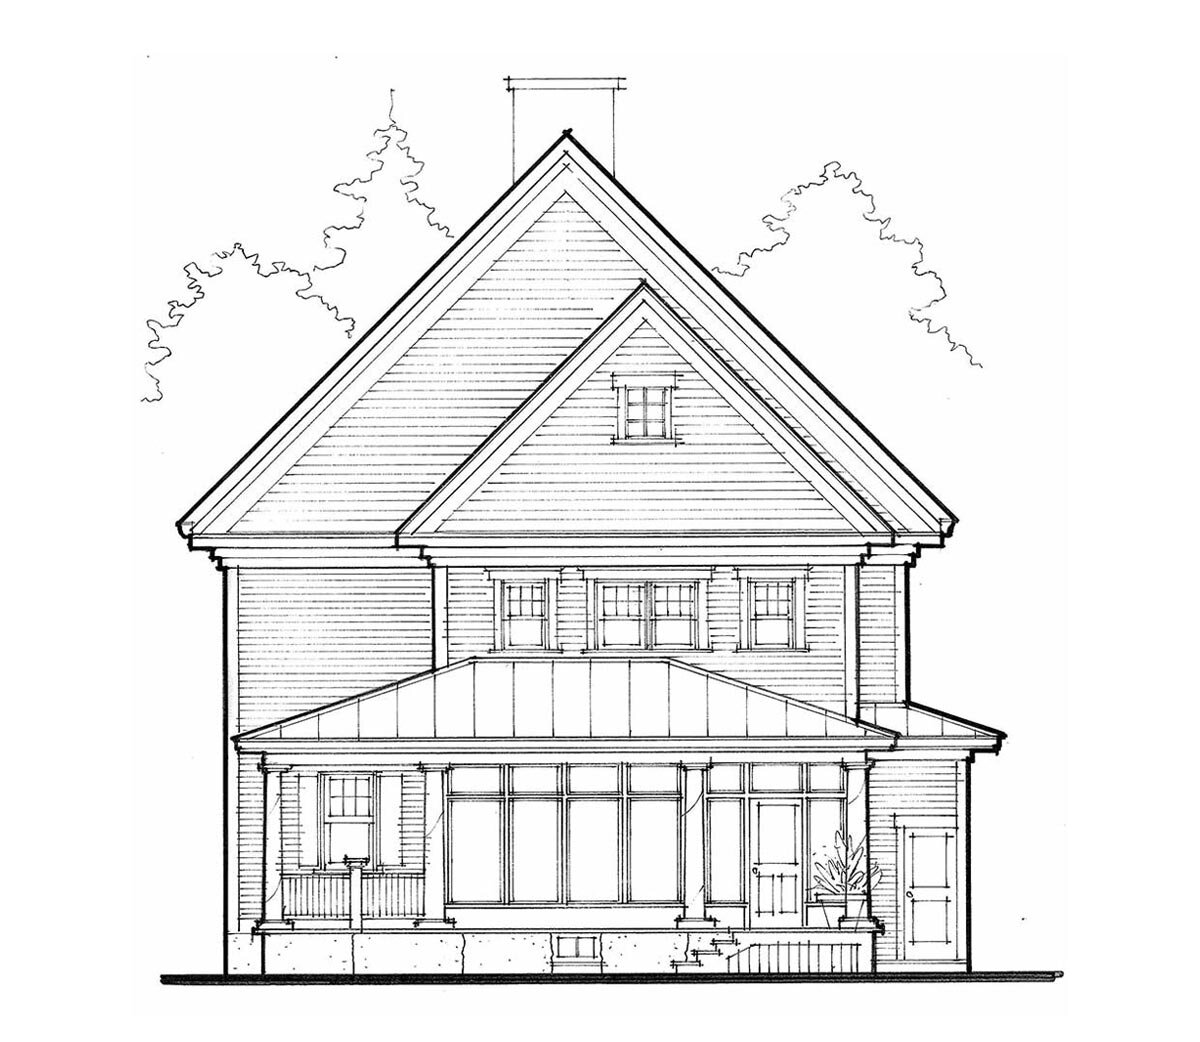 maine-architecture-house-drawing.jpg